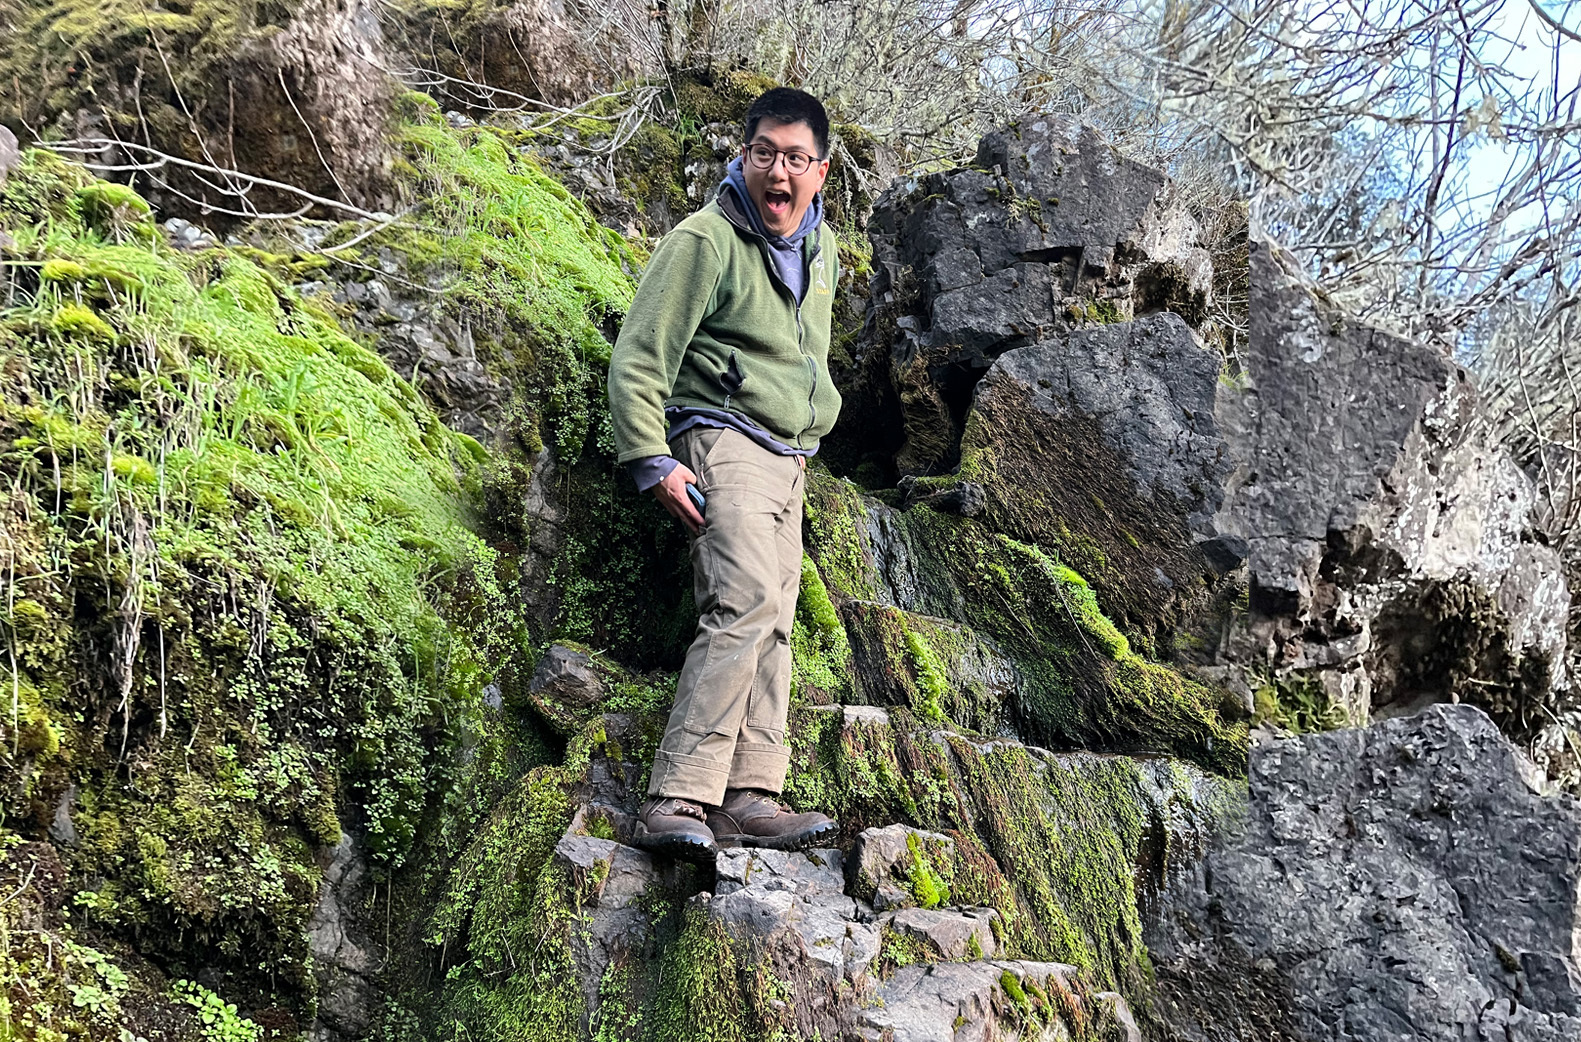 Ben Chang stands on rocks and smiles because he likes it so much